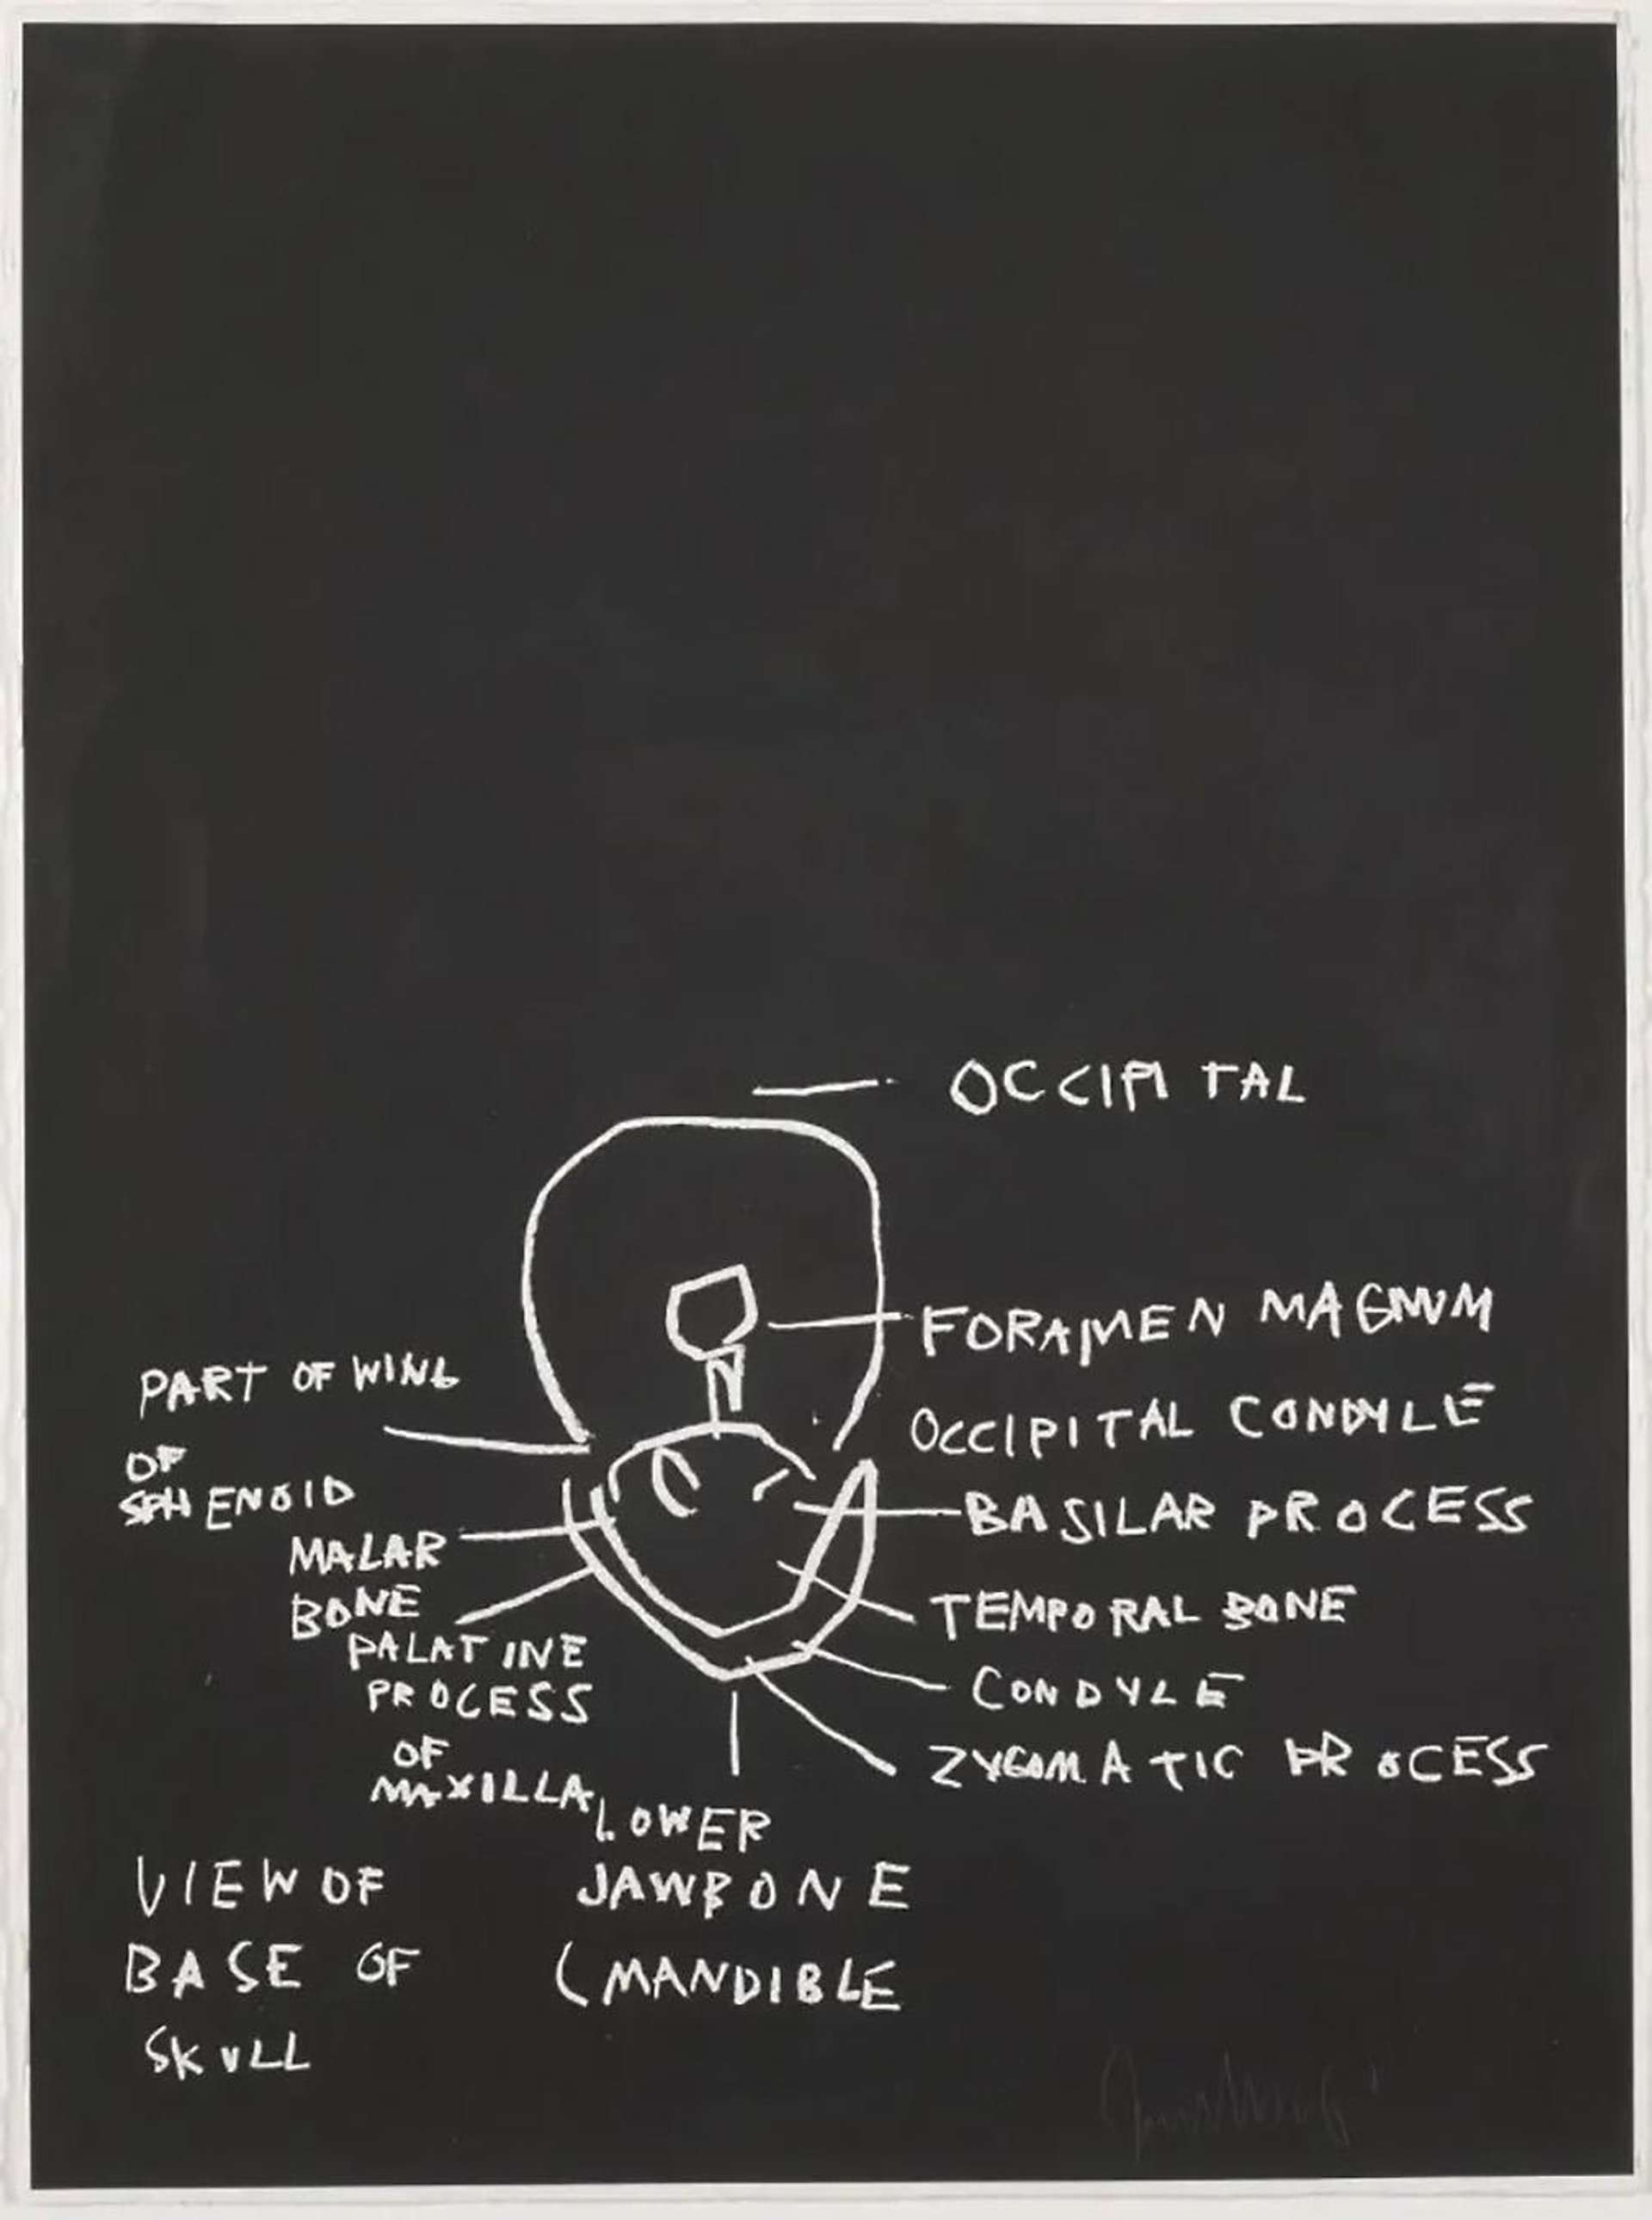 Jean-Michel Basquiat’s Anatomy, View Of Base Of Skull. A black screenprint featuring white anatomical drawings of the base of a human skull with descriptive labels.